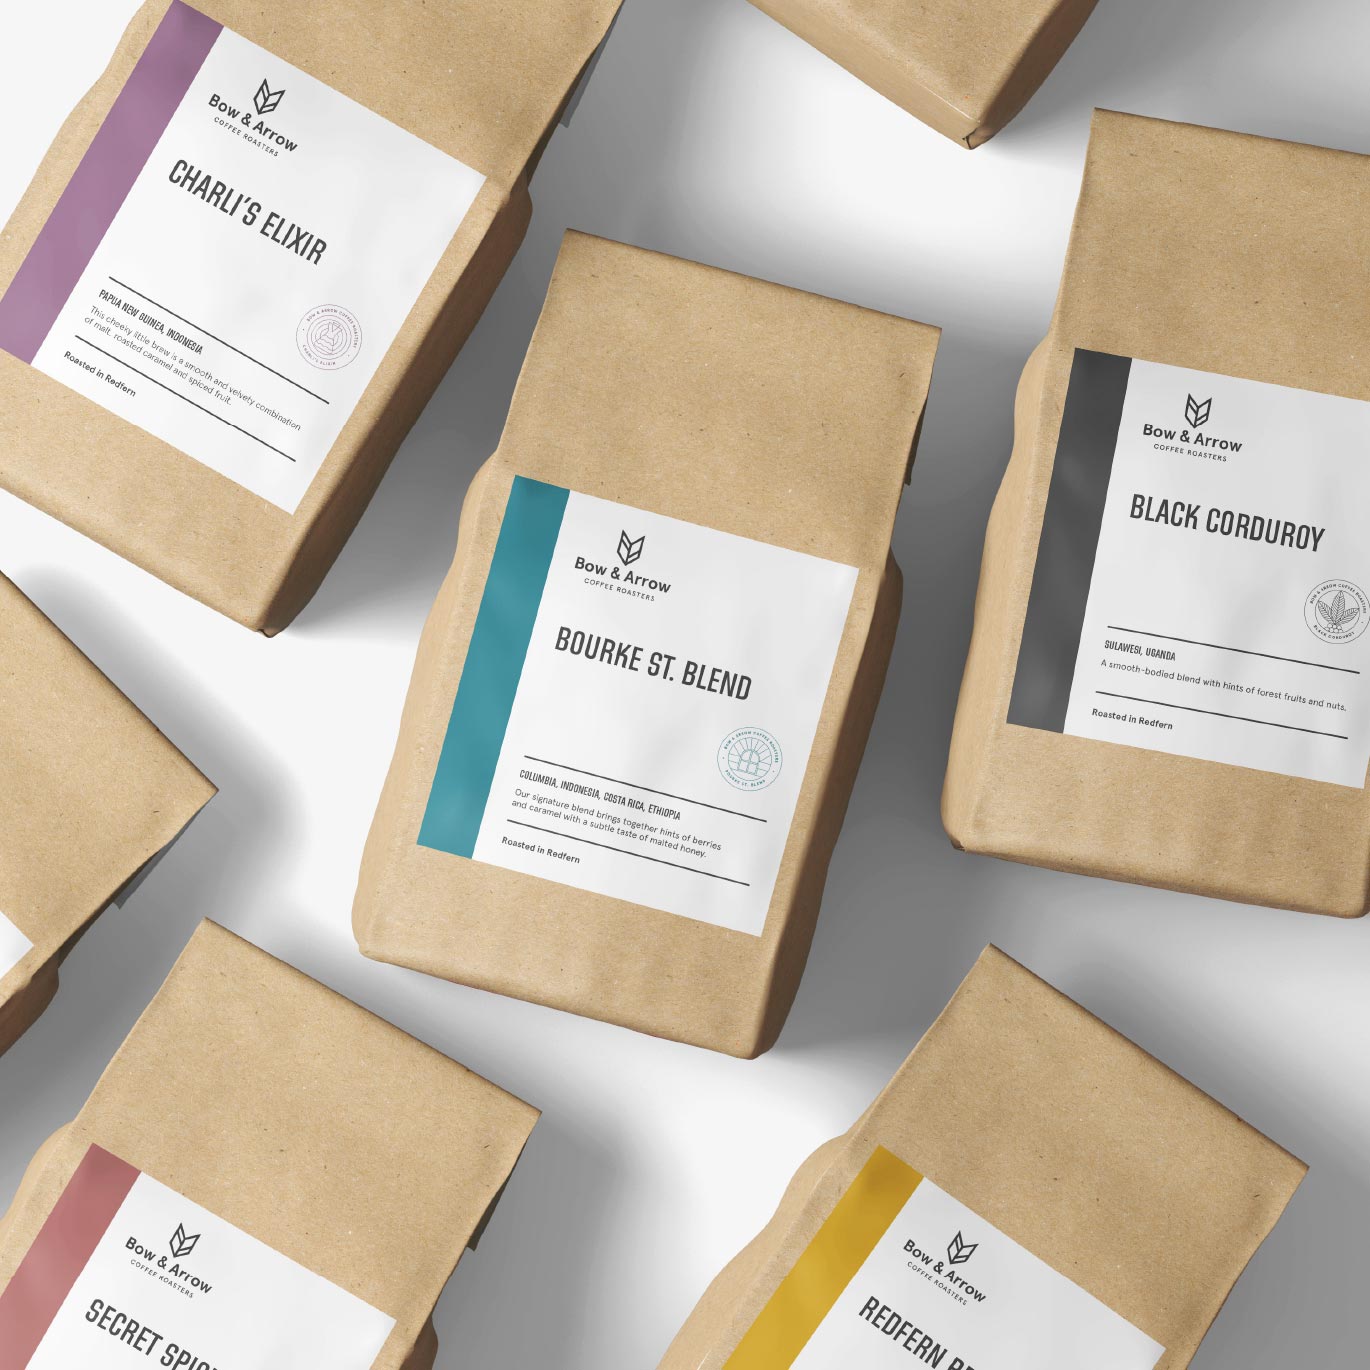 Packaging and Cafe. Branding, brand identity, logo design, web design and photography. Sydney, Surry Hills